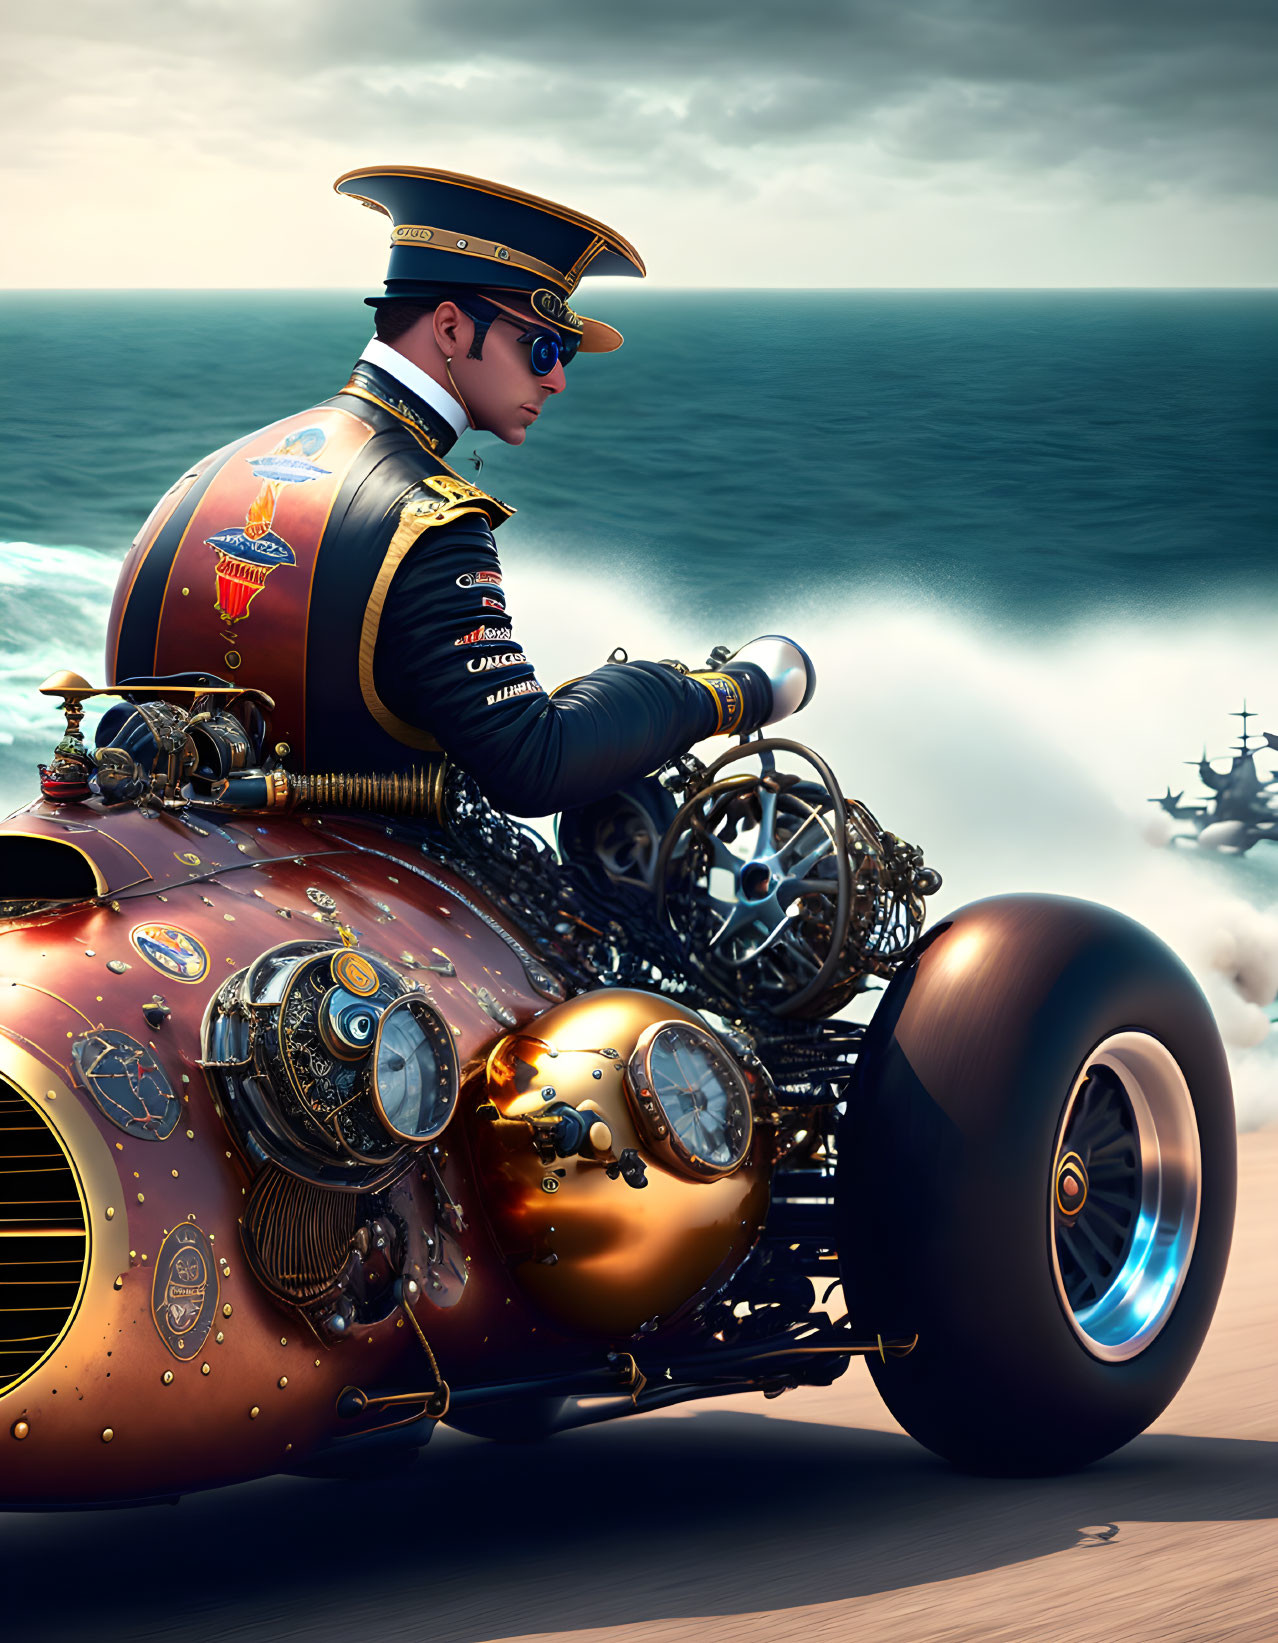 Decorated pilot on brass and gold motorcycle at sea with ships in background